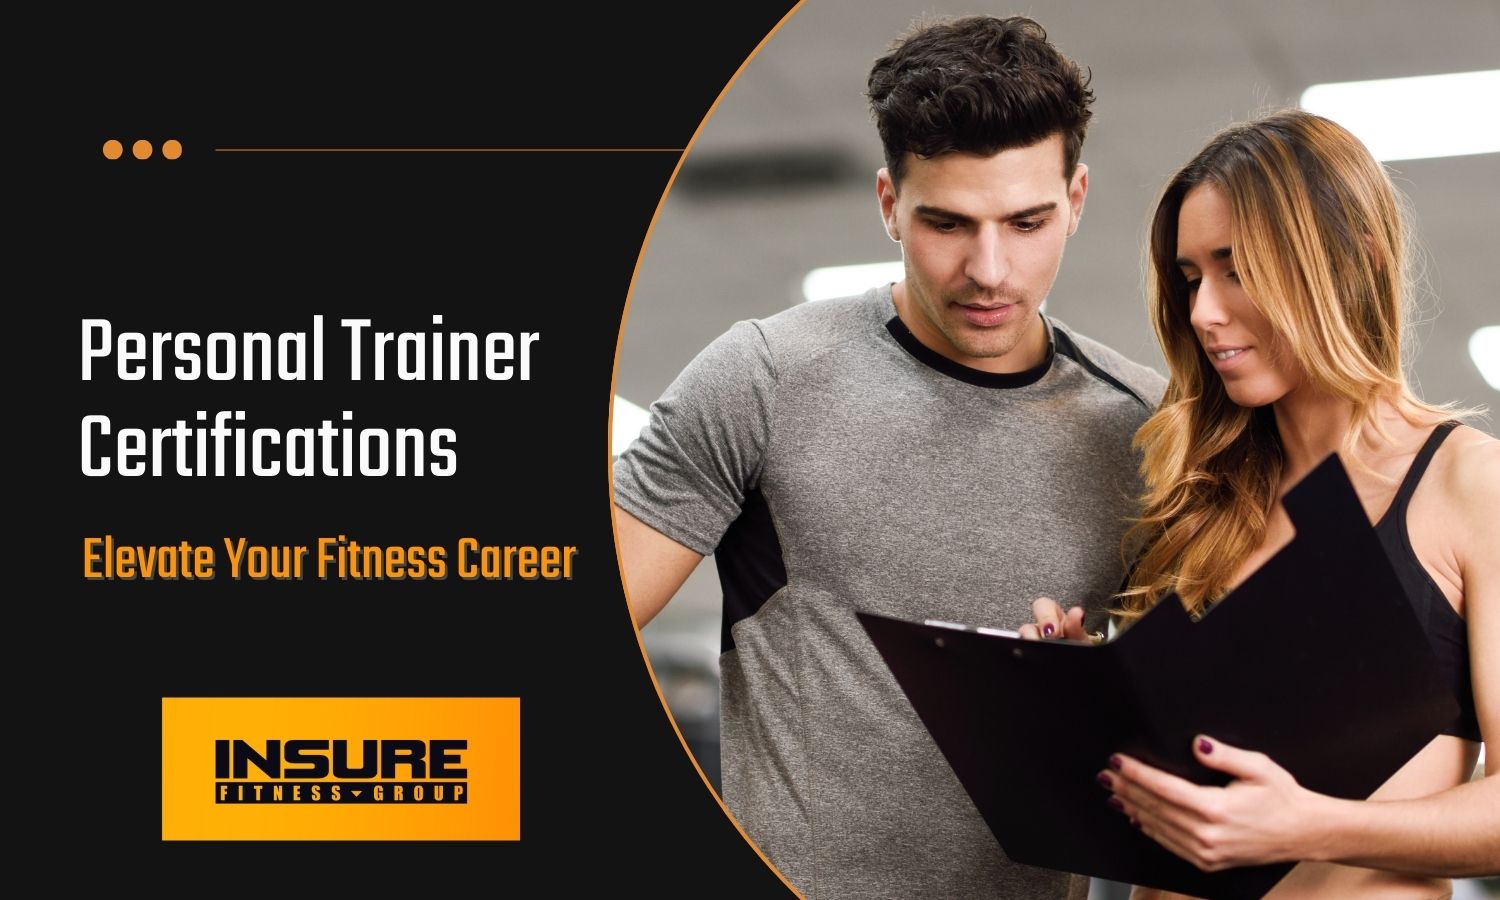 Male personal trainer discussing Personal Trainer Certifications with a female client, with text 'Elevate Your Fitness Career' for an INSURE FITNESS GROUP ad.